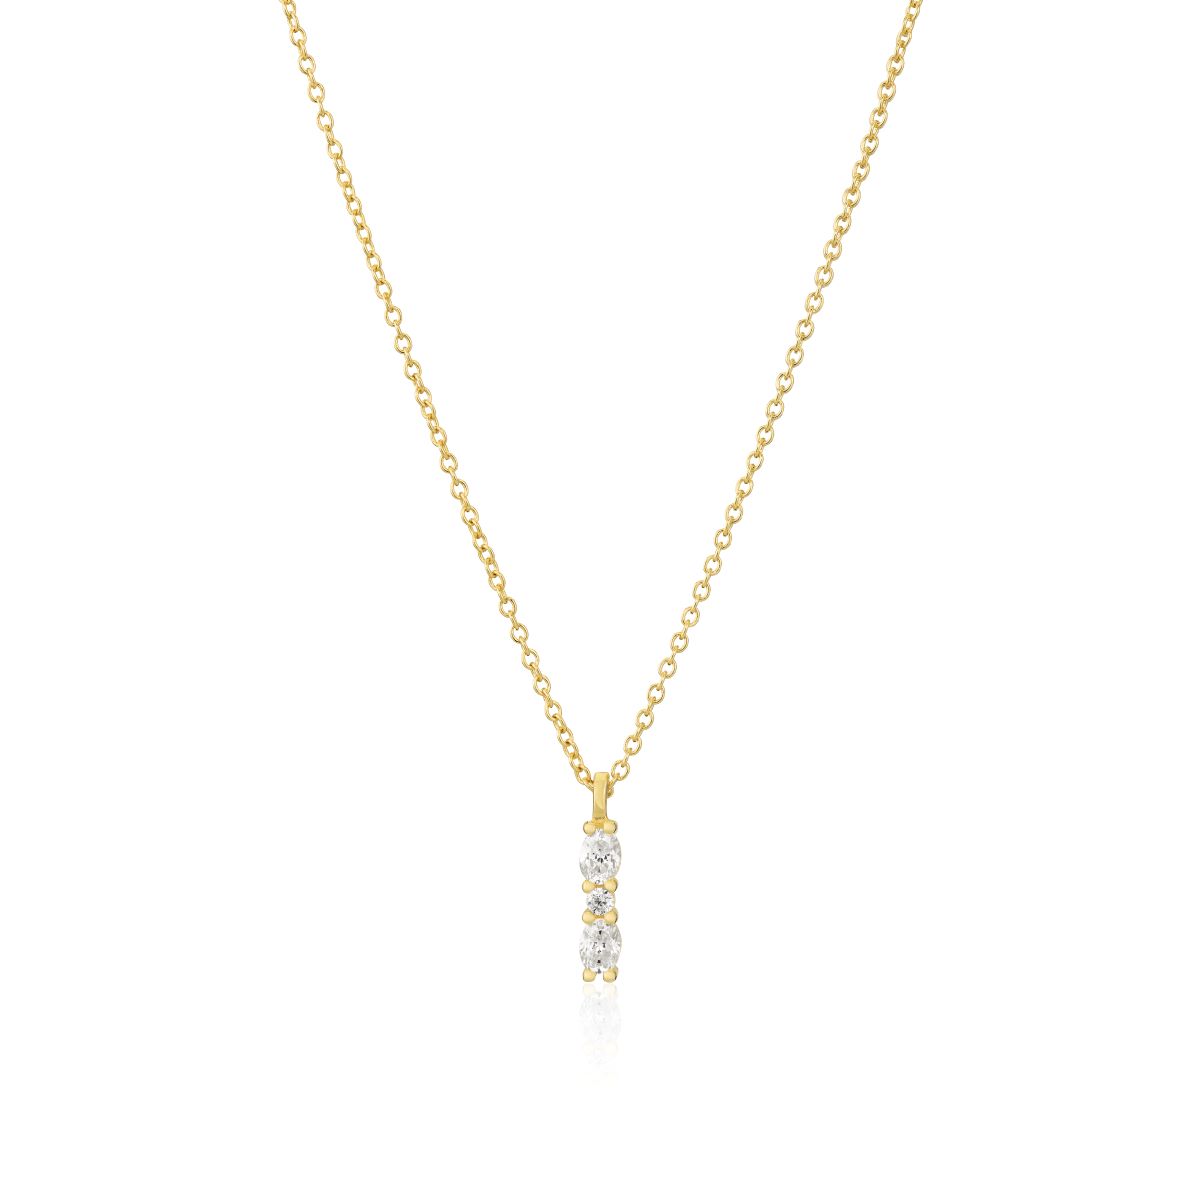 Sif Jakobs Ellera Ovale Piccolo Necklace - 18k Gold Plated with White Zirconia - SJ-N2414-CZ-YG